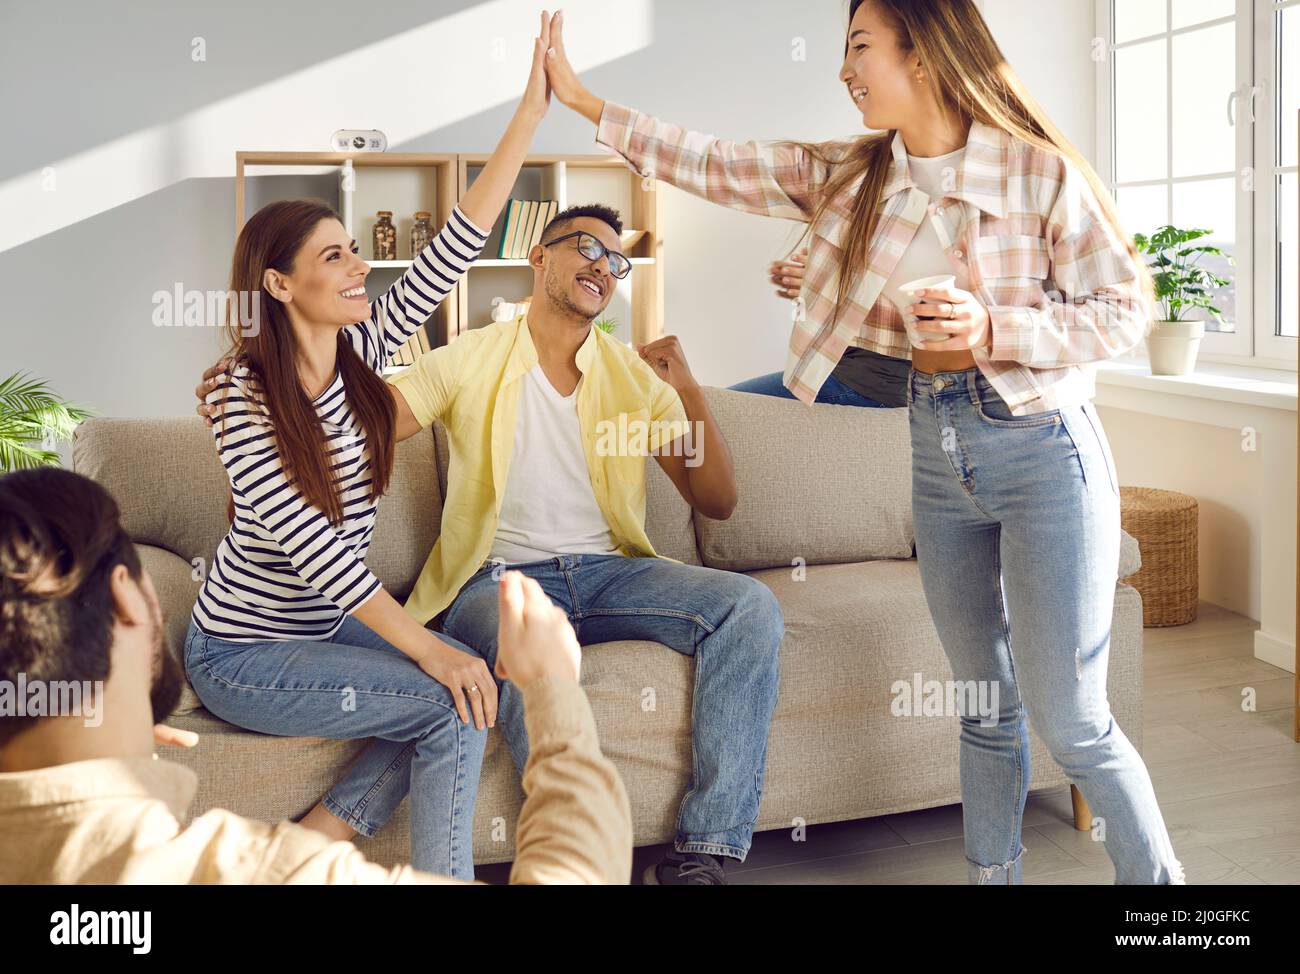 Happy excited young women give high fiving each other while having fun at home with friends. Stock Photo